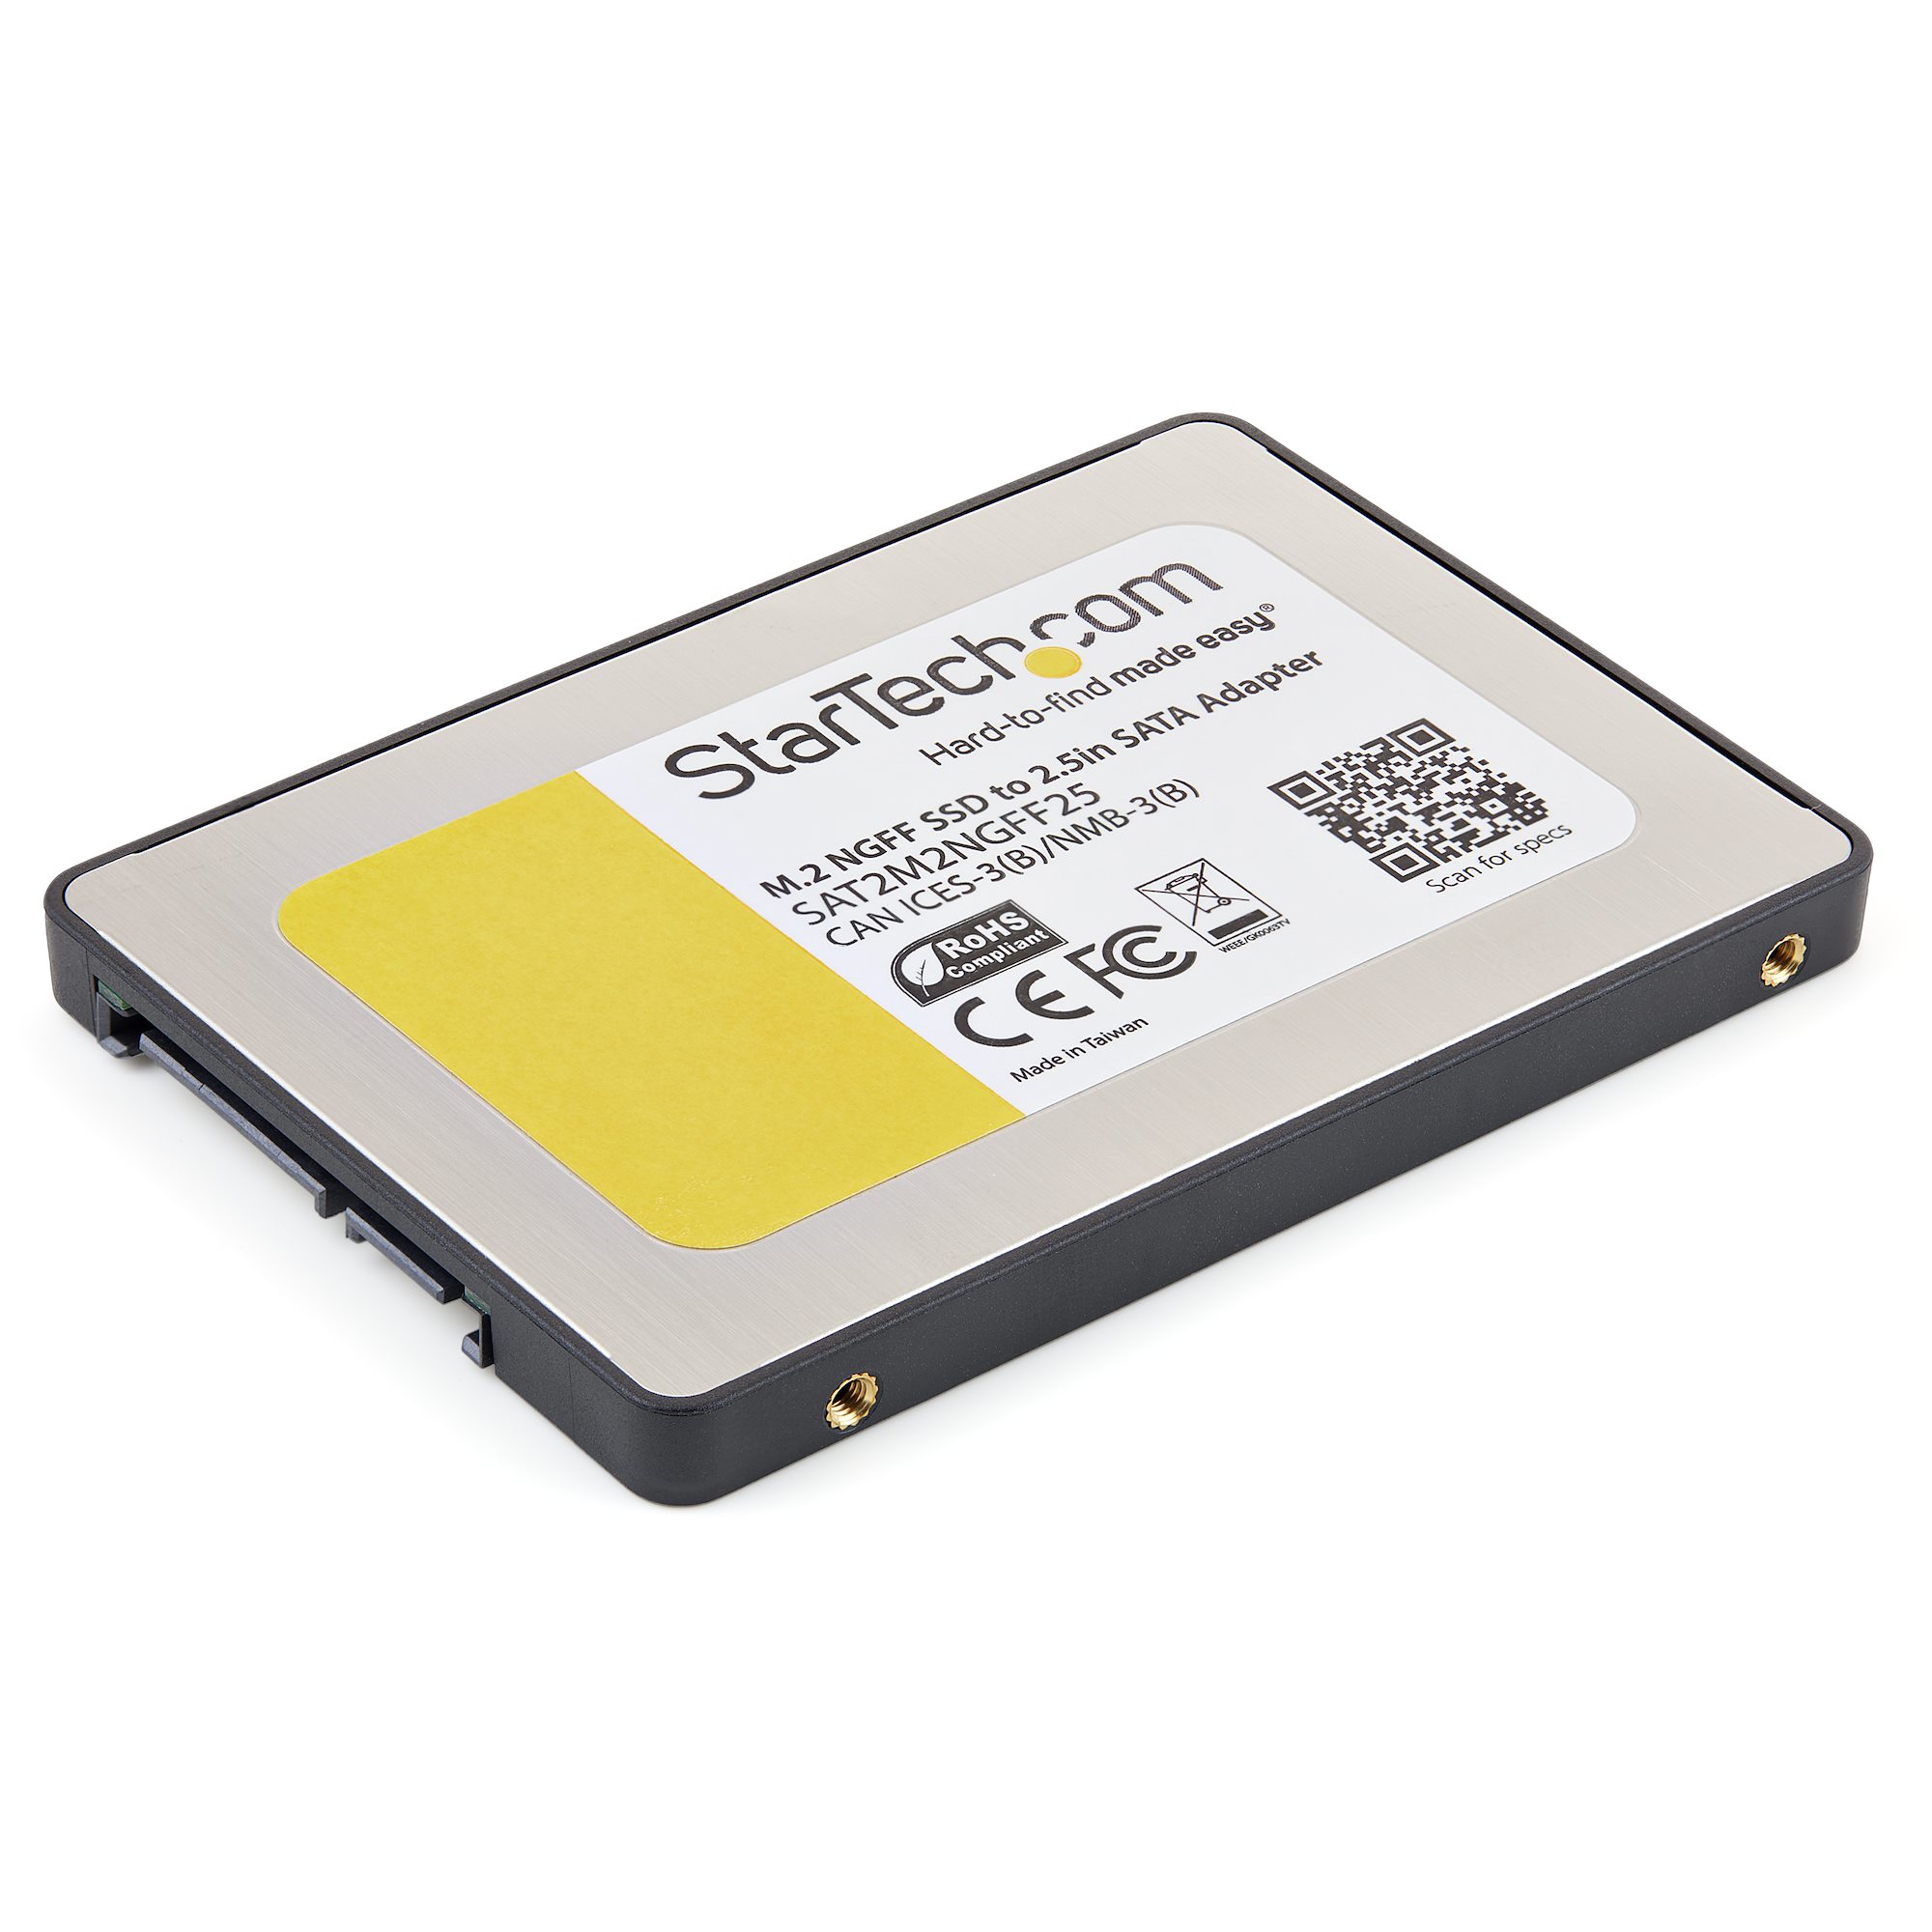 Far Celebrity Løfte Adapter - M.2 SSD to 2.5in SATA III - Drive Adapters and Drive Converters |  StarTech.com